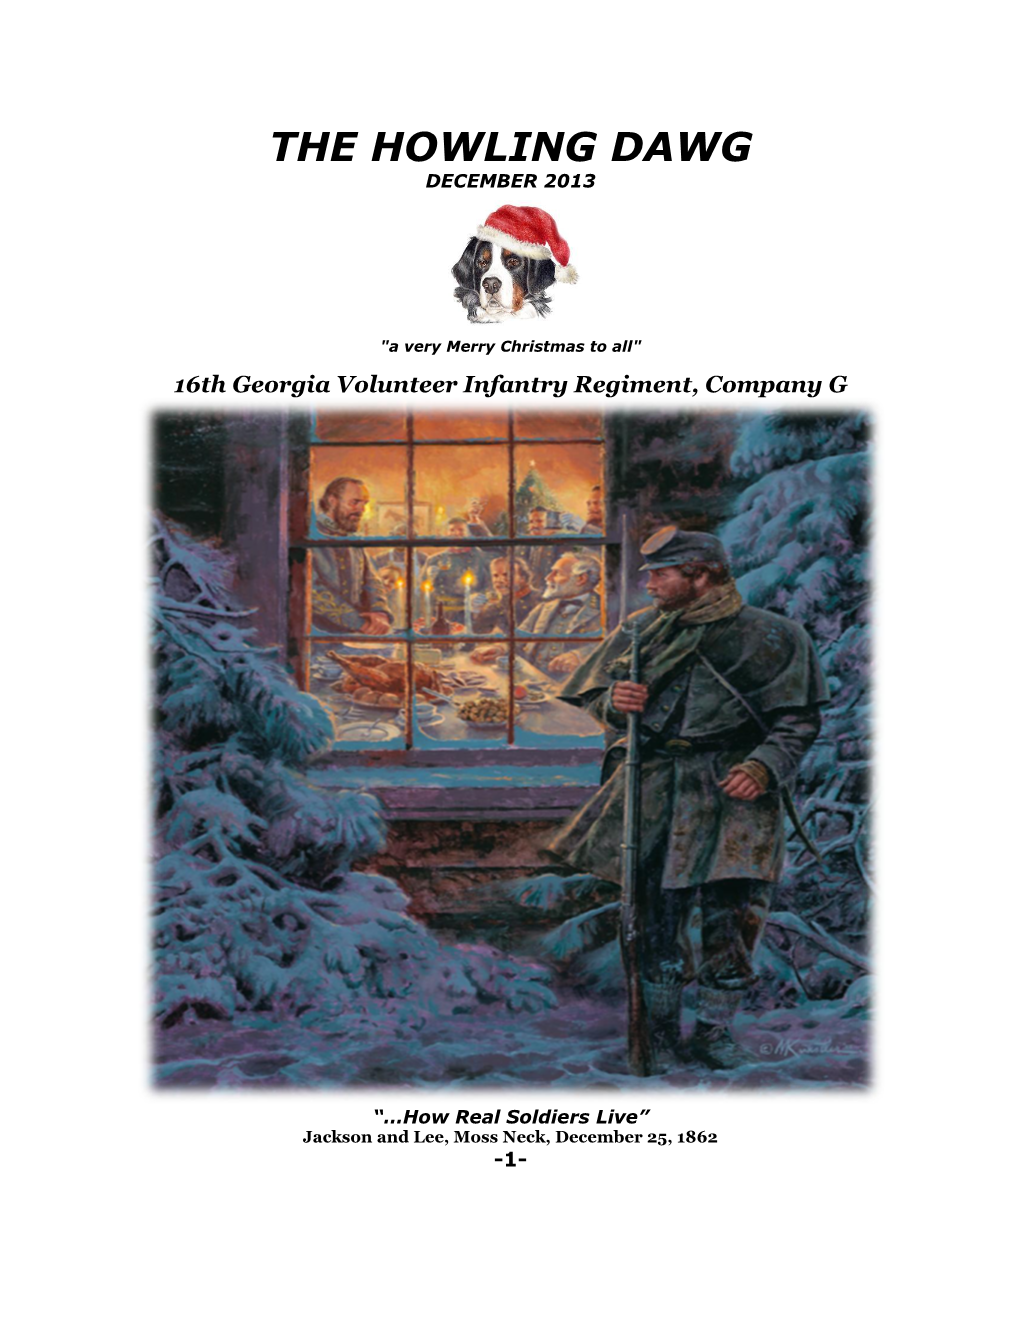 The Howling Dawg December 2013